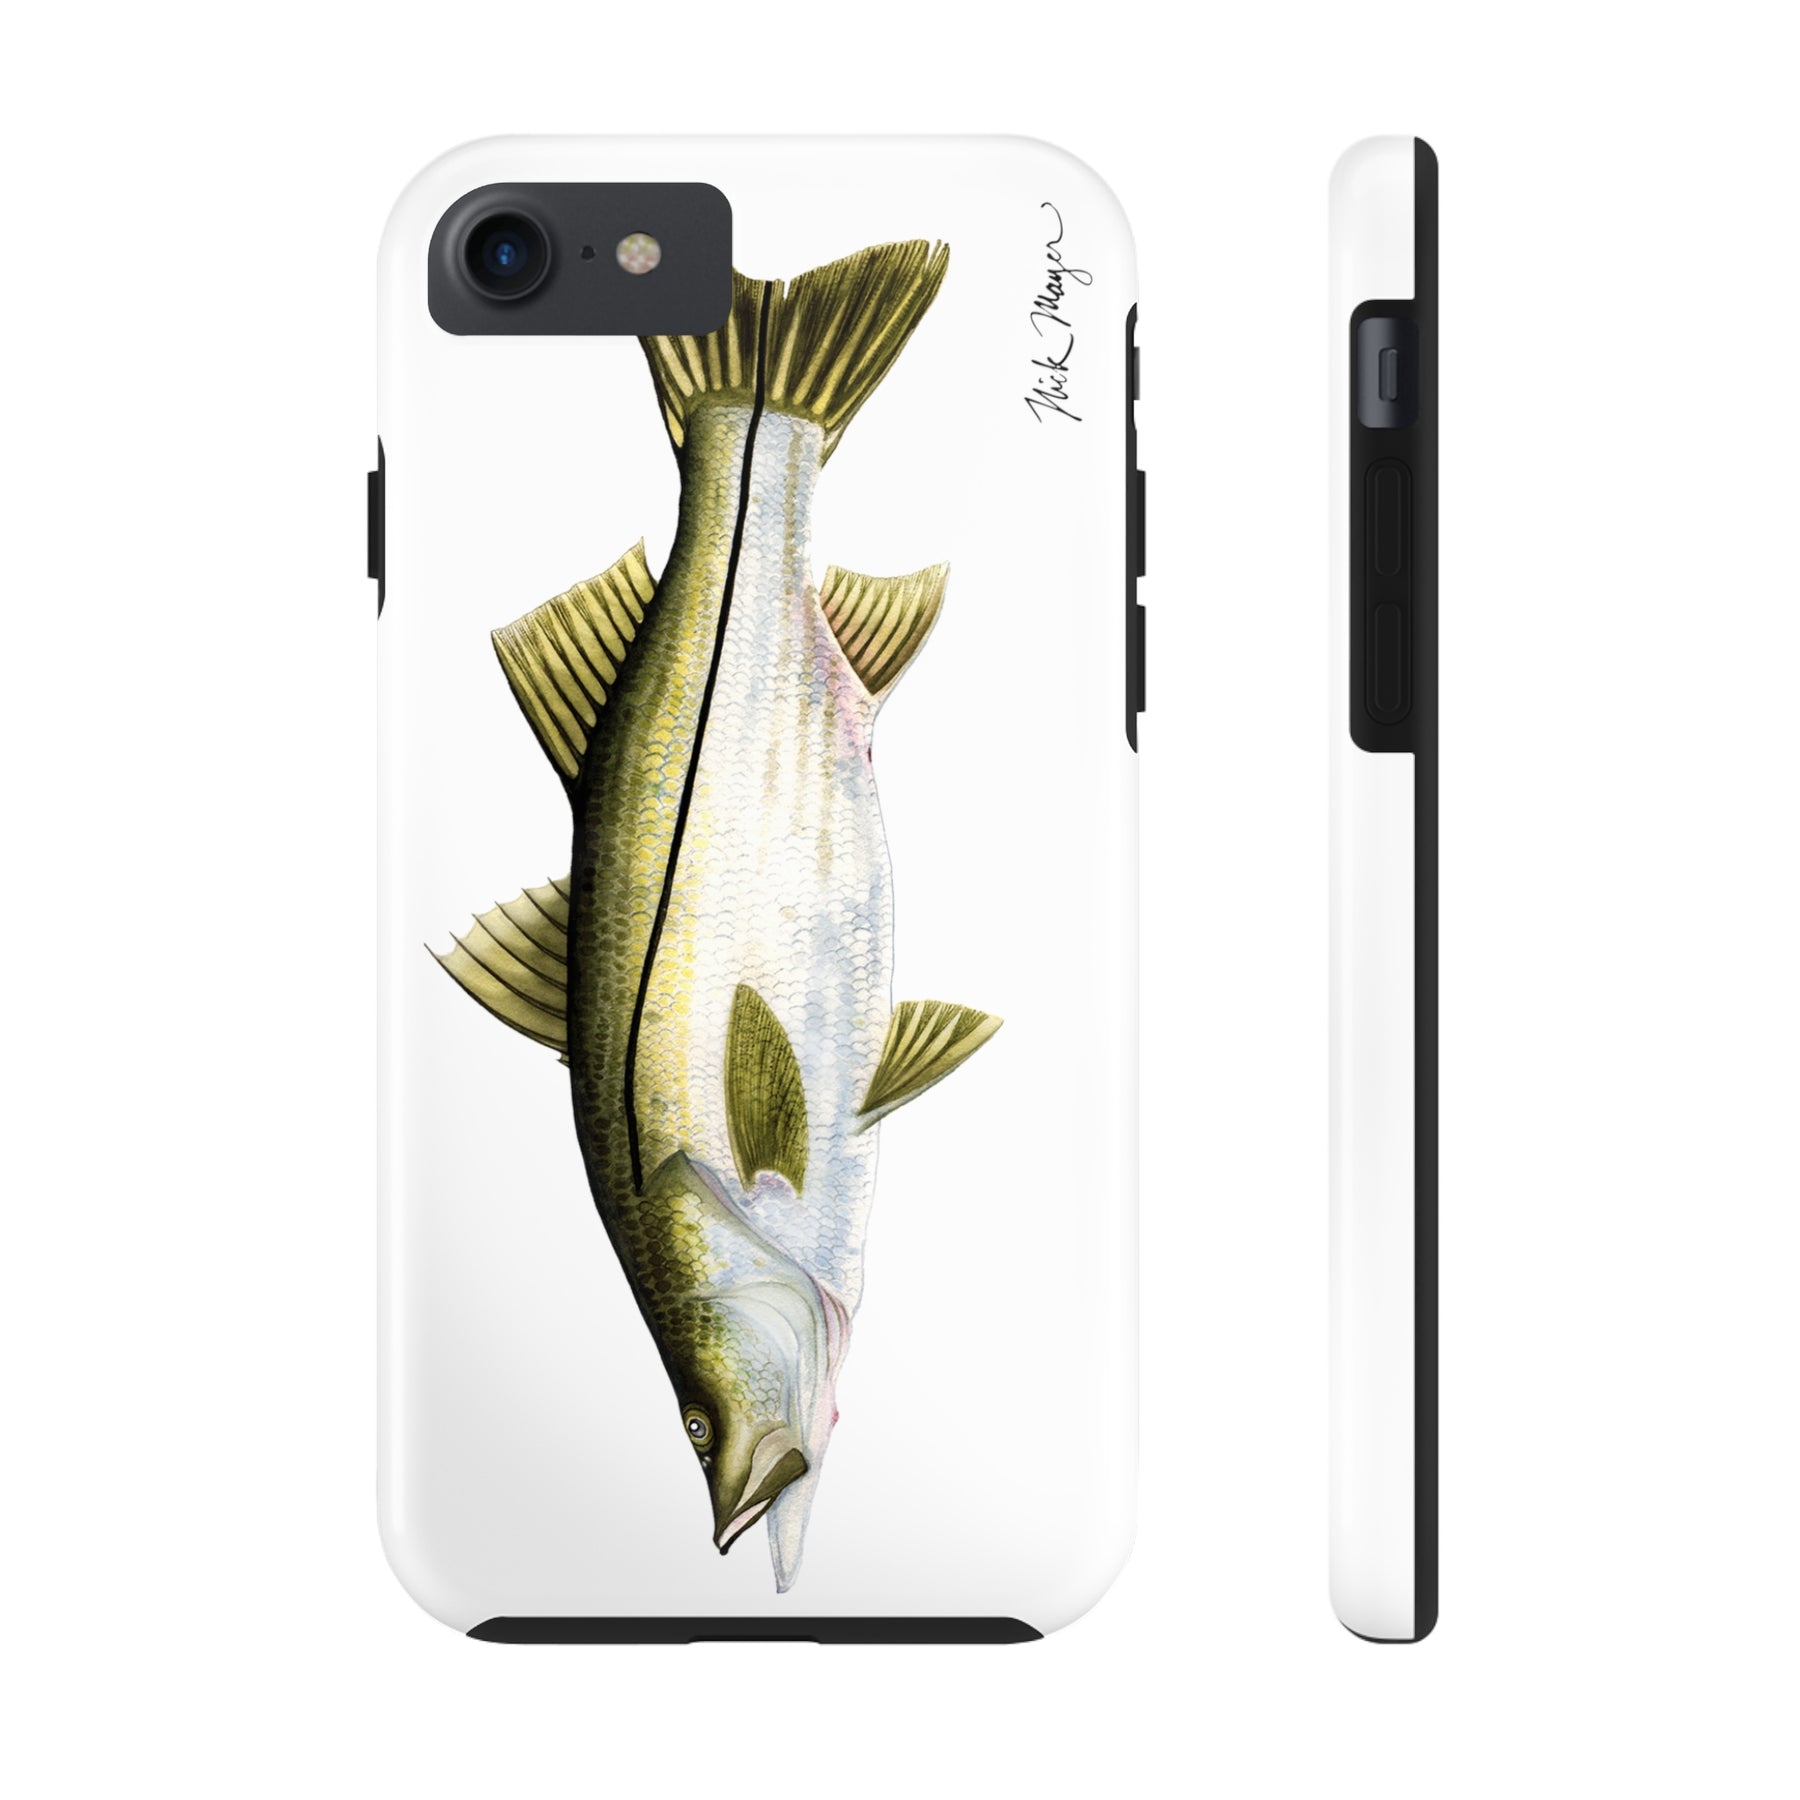 BASS FISHING ANGLER Outdoor Fly Fish Apple iPhone 12 11 Mini Pro Max X Xs 8  7 7 Plus 8 Plus 6/6S Samsung Galaxy S9 S10 Phone Case Cover 